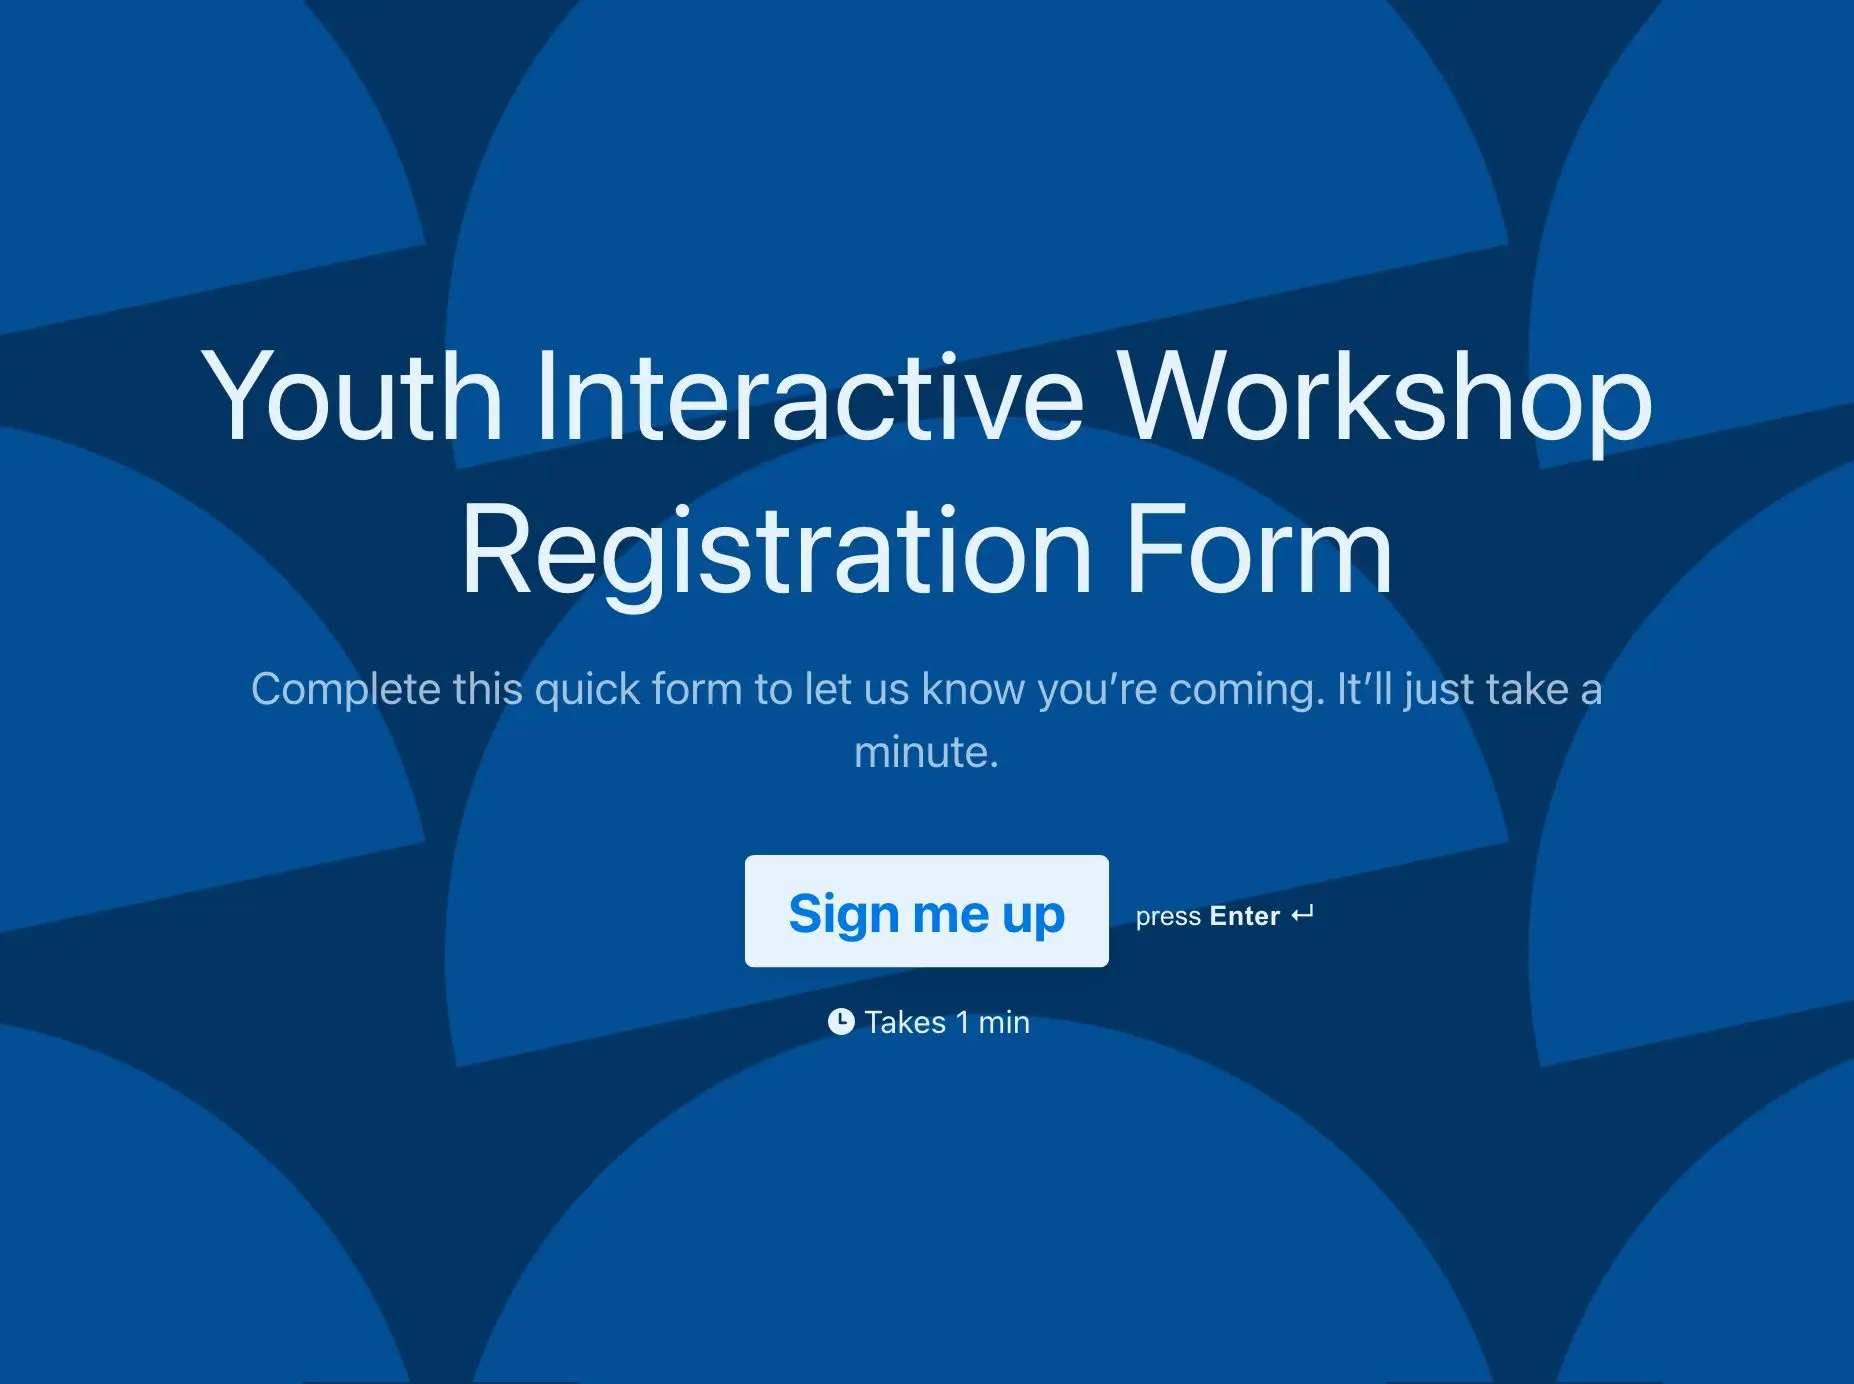 Youth Interactive Workshop Registration Form Template Hero